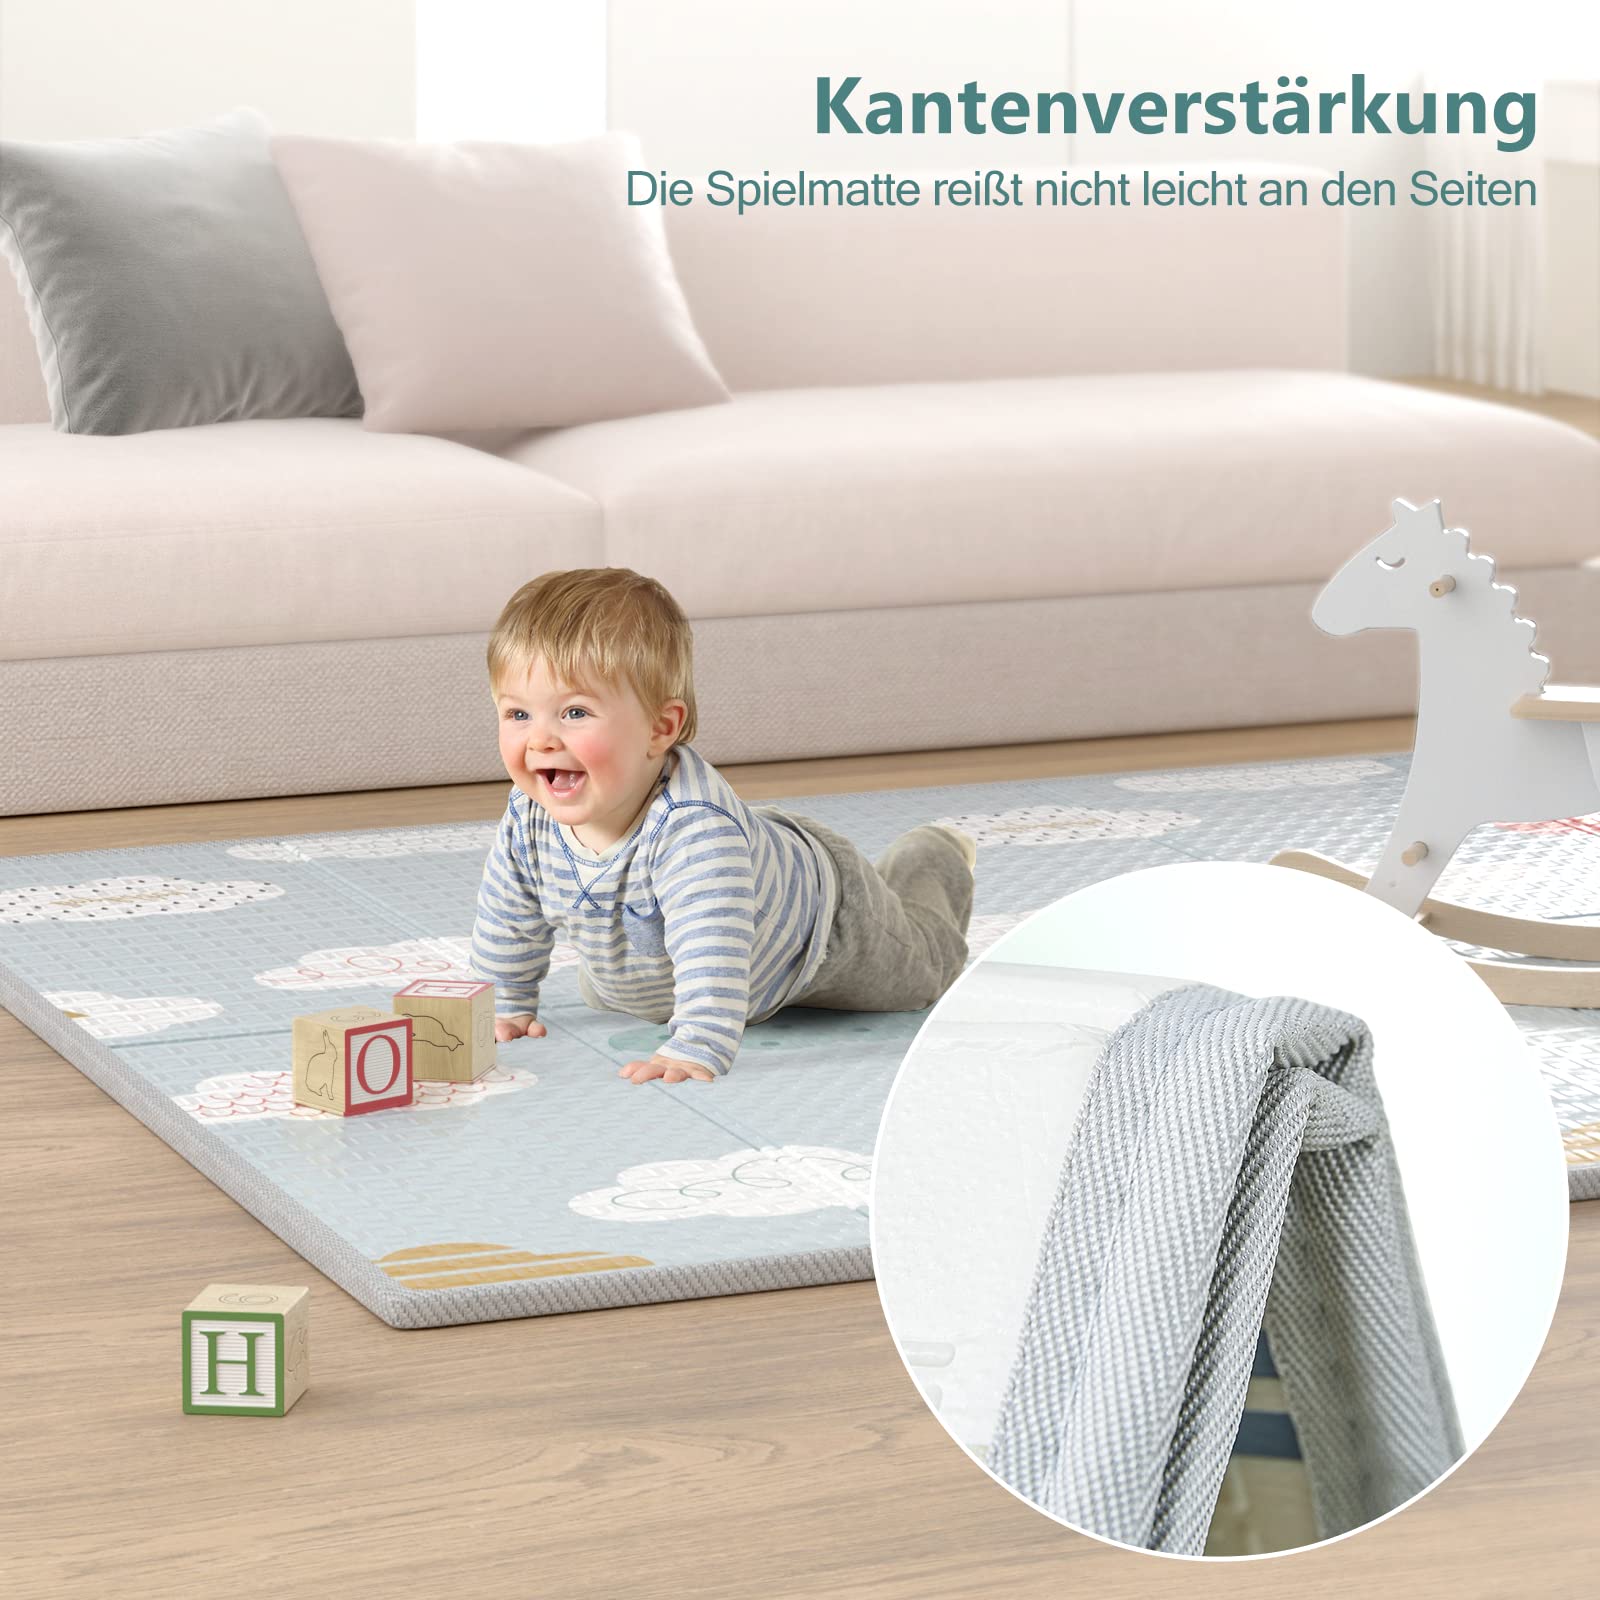 PKINOICY 71x59inch Play Mat for Baby, Crawling Mat for Infants Toddlers Kids,Foldable Kids Play Mat,Waterproof Crawling Mat - image 4 of 7